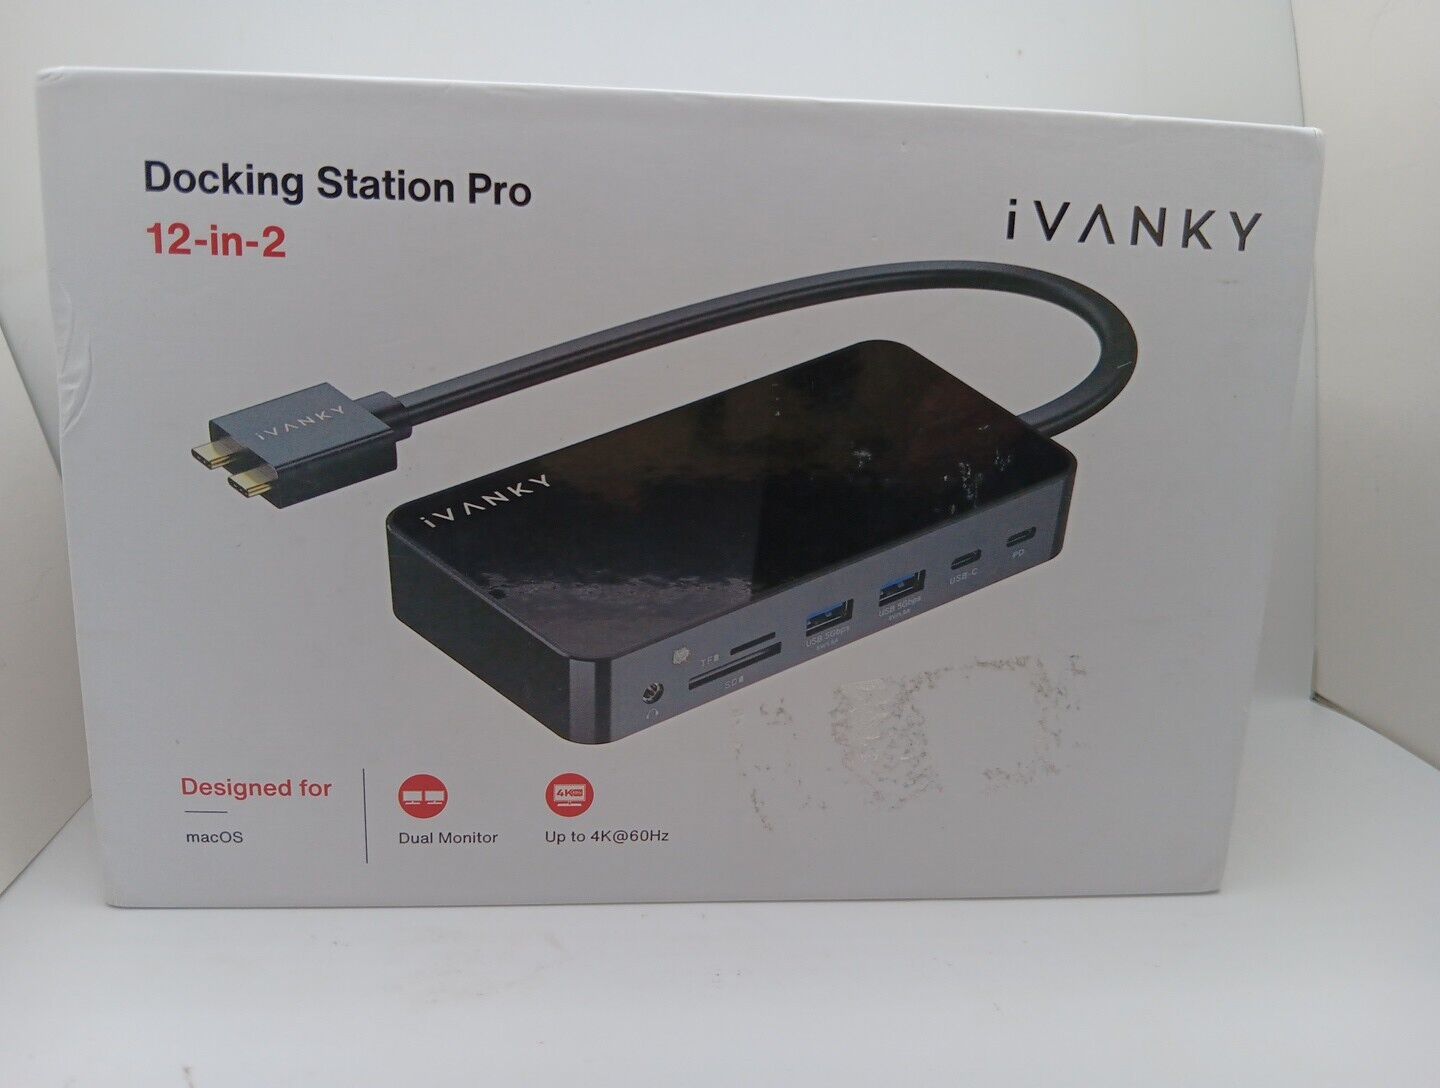 MacBook Pro Docking Station with 180W Power Adapter, iVANKY 12 in 2 Dual 4K@60Hz